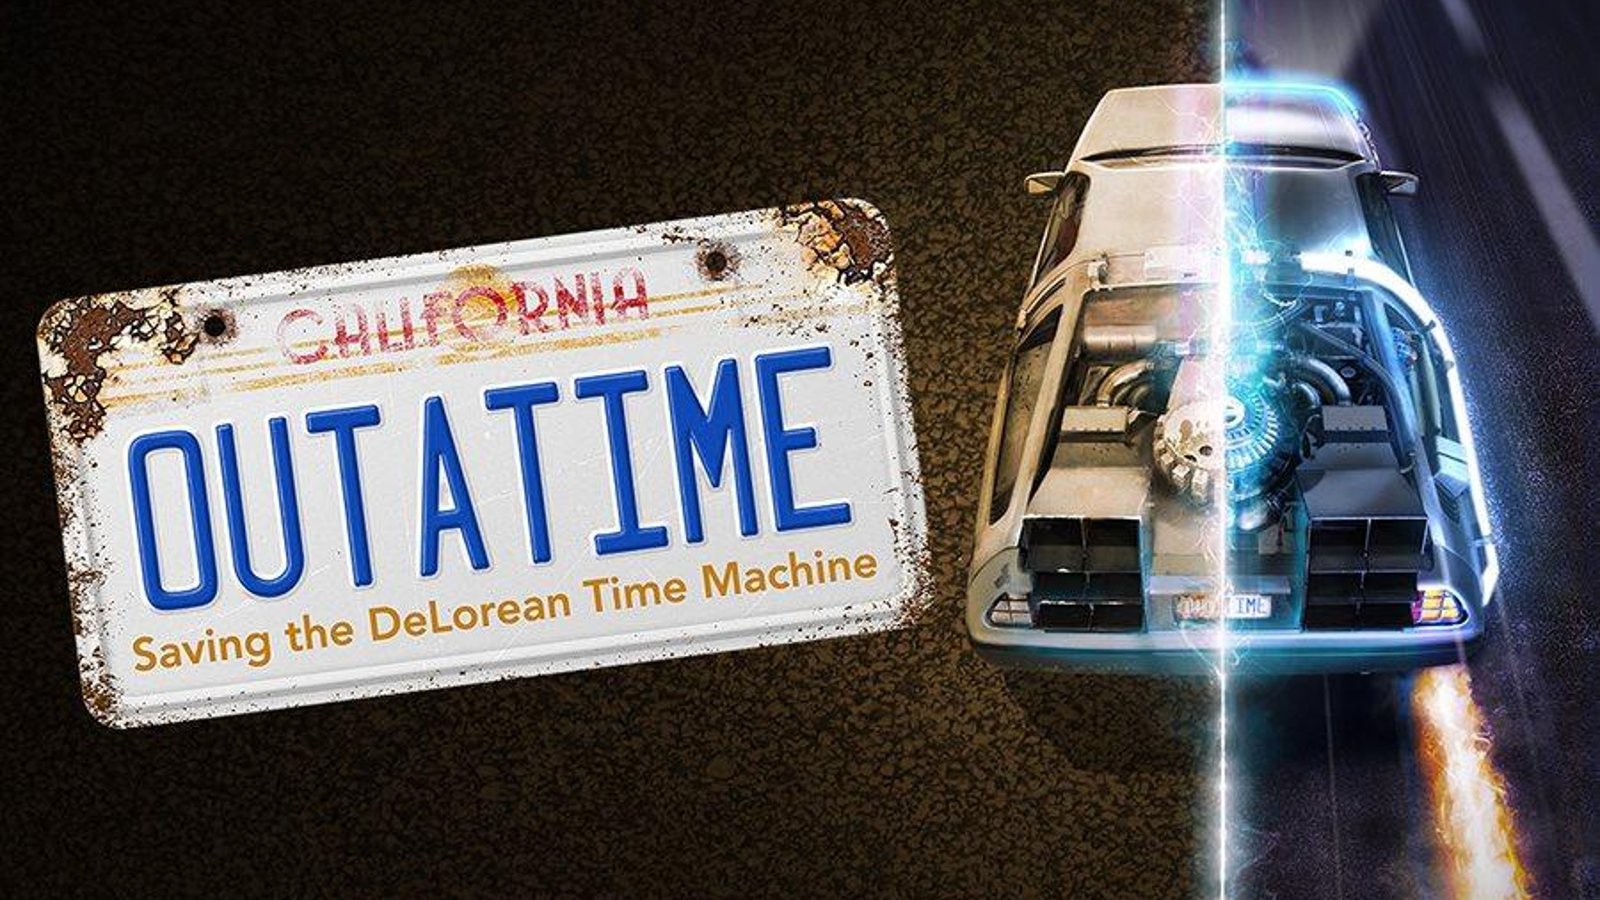 OUTATIME: Saving the DeLorean - Restoring a Beloved Prop from Back to the Future